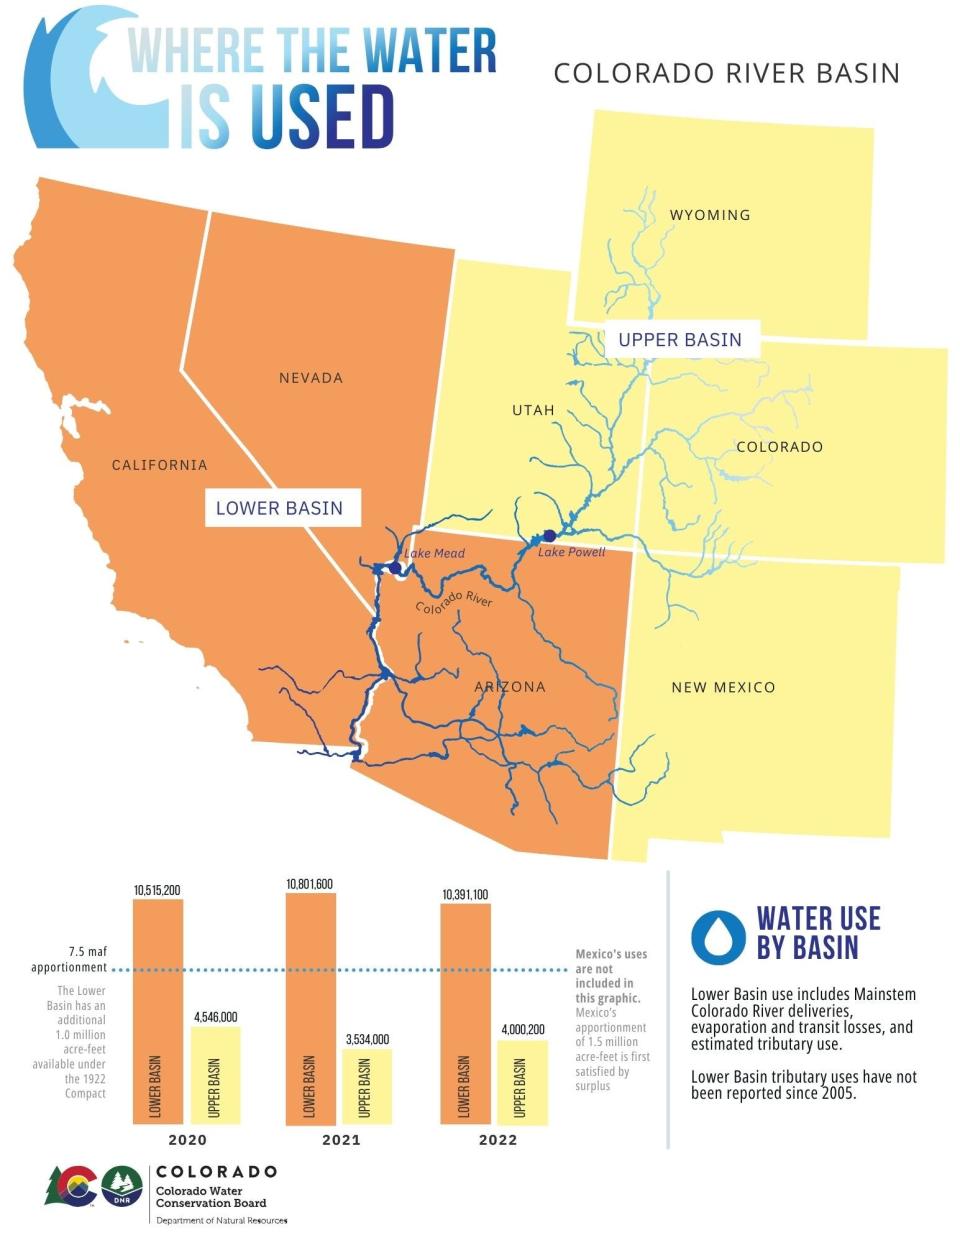 States in the northern Upper Basin of the Colorado River say they have been forced to use about half of their share of the river in recent years, while those in the Lower Basin have used or lost to evaporation and seepage twice as much as them.